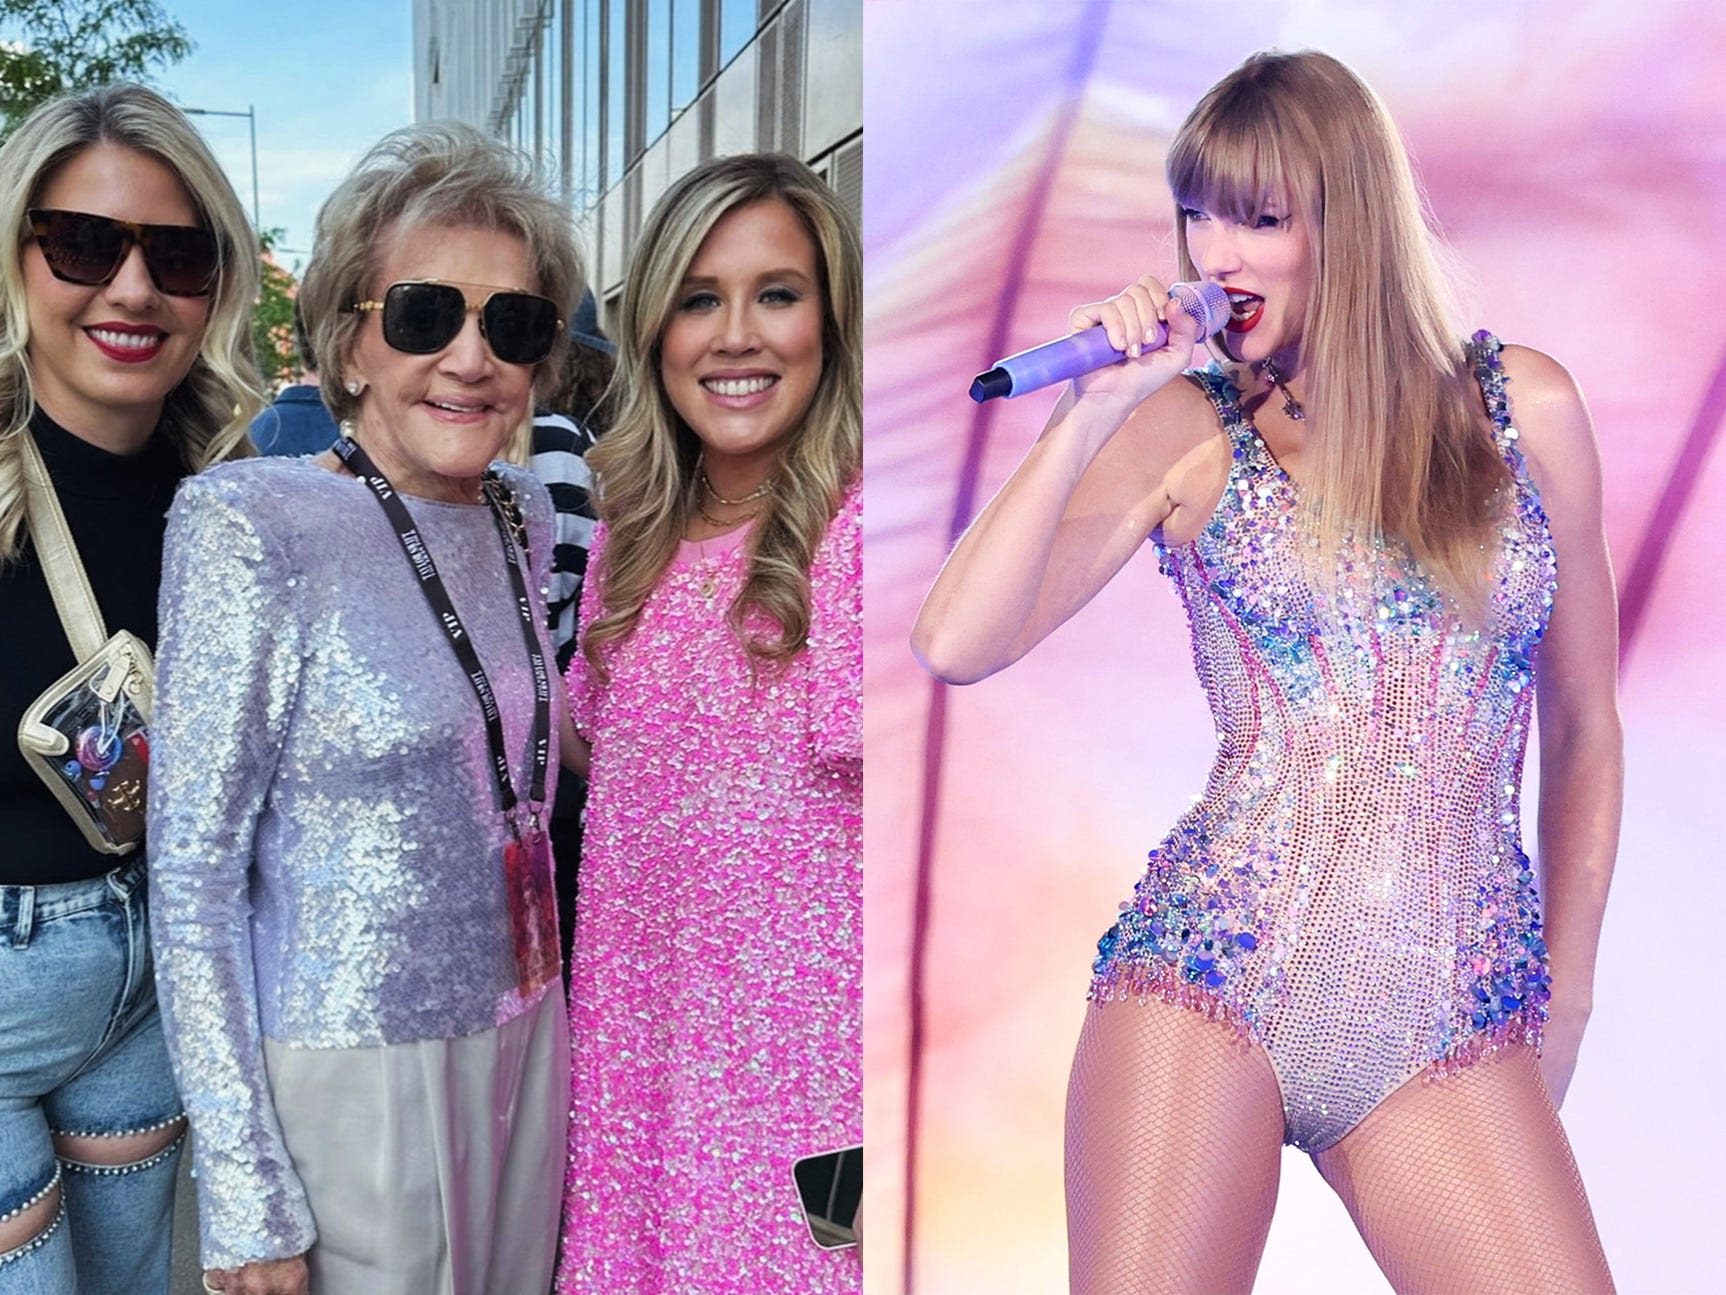 I'm 89 and a huge Taylor Swift fan. I didn't let my age stop me from flying to Paris to see her in concert.